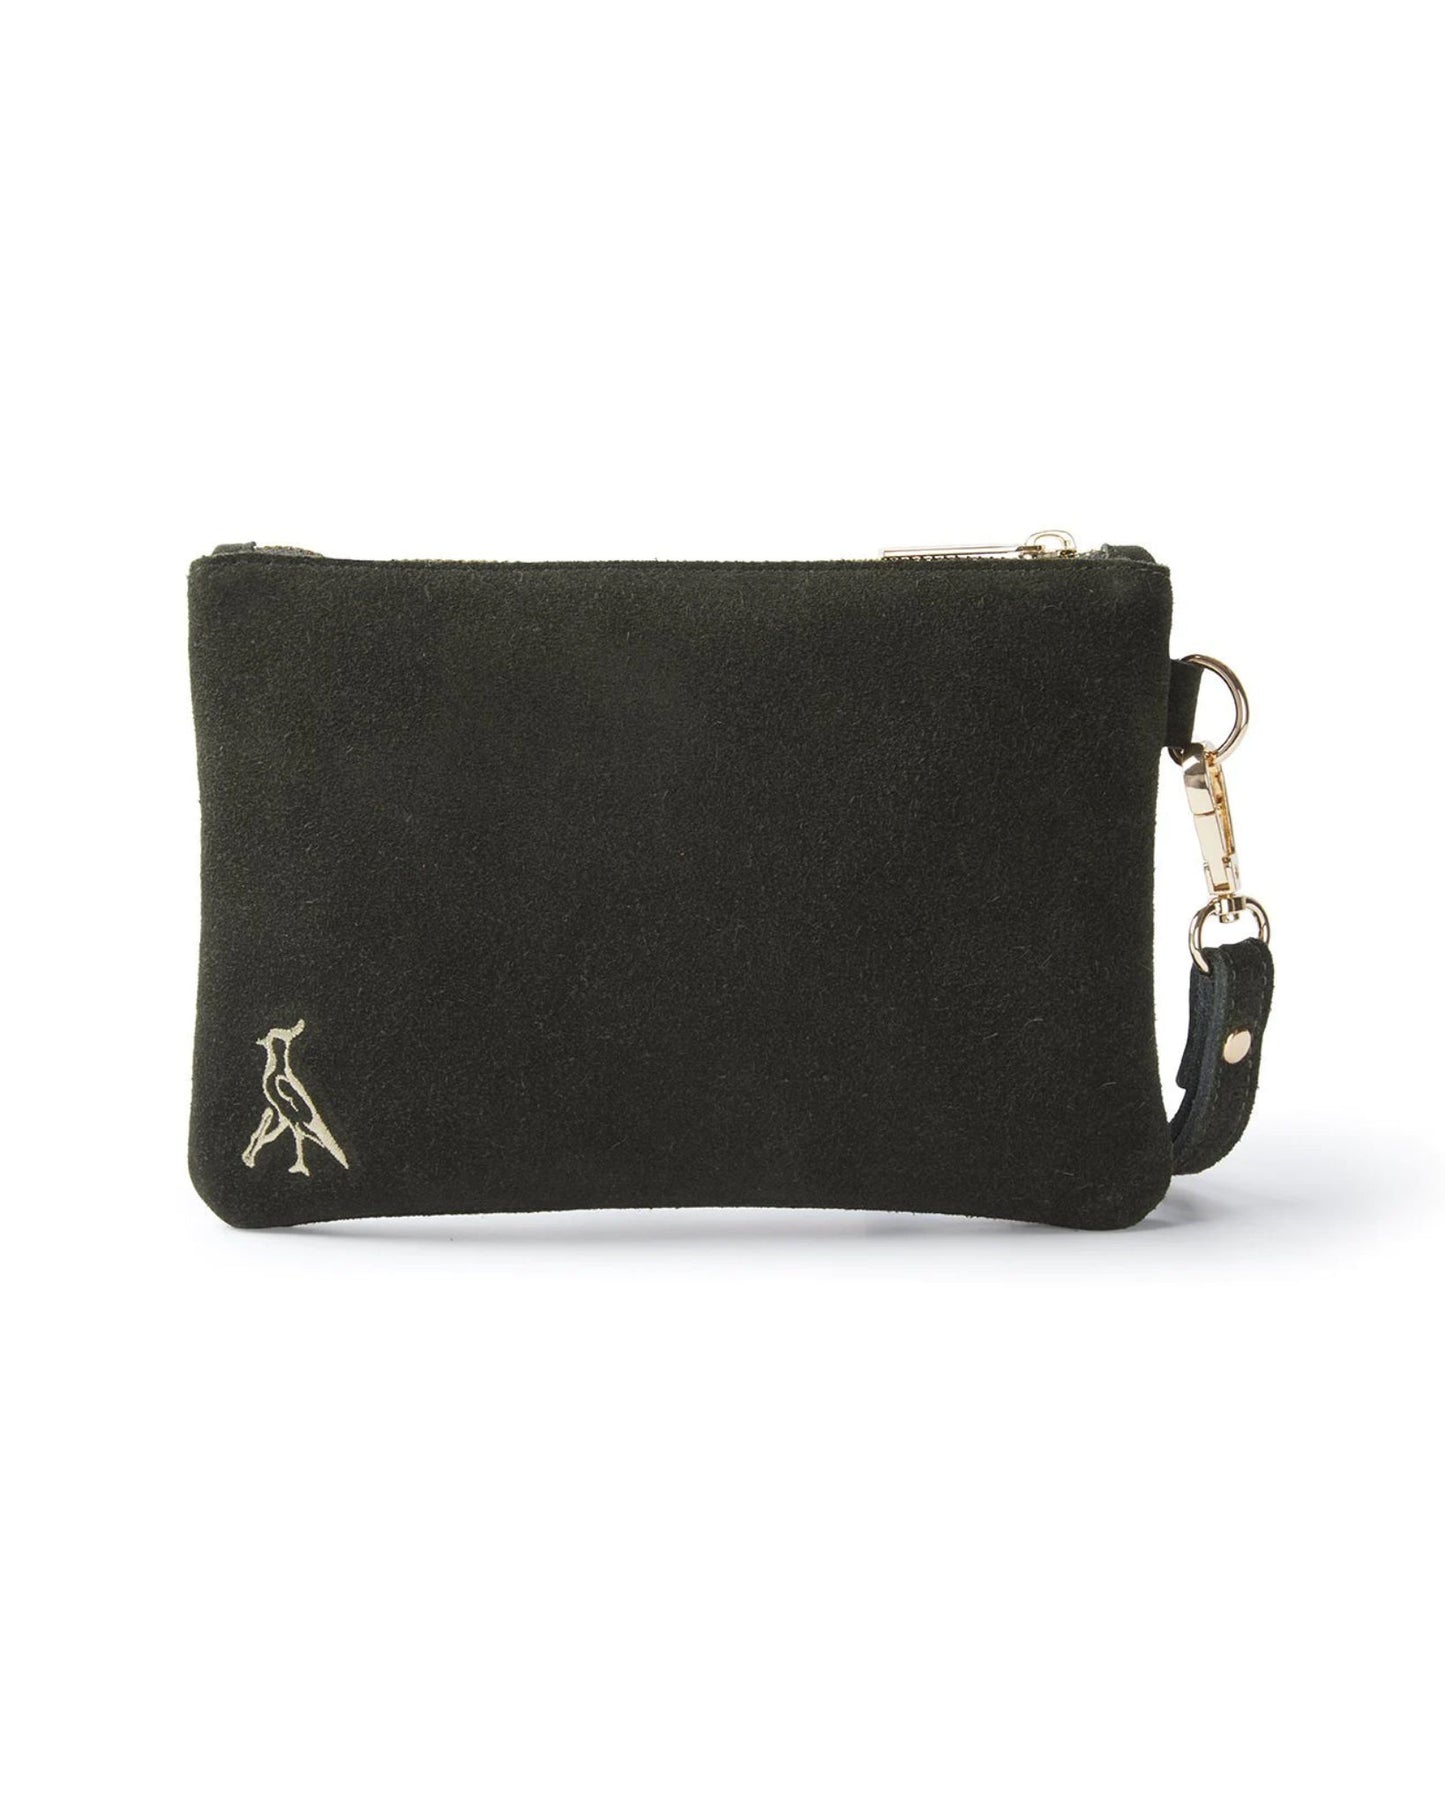 The Chelsworth Clutch Bag - Olive Green